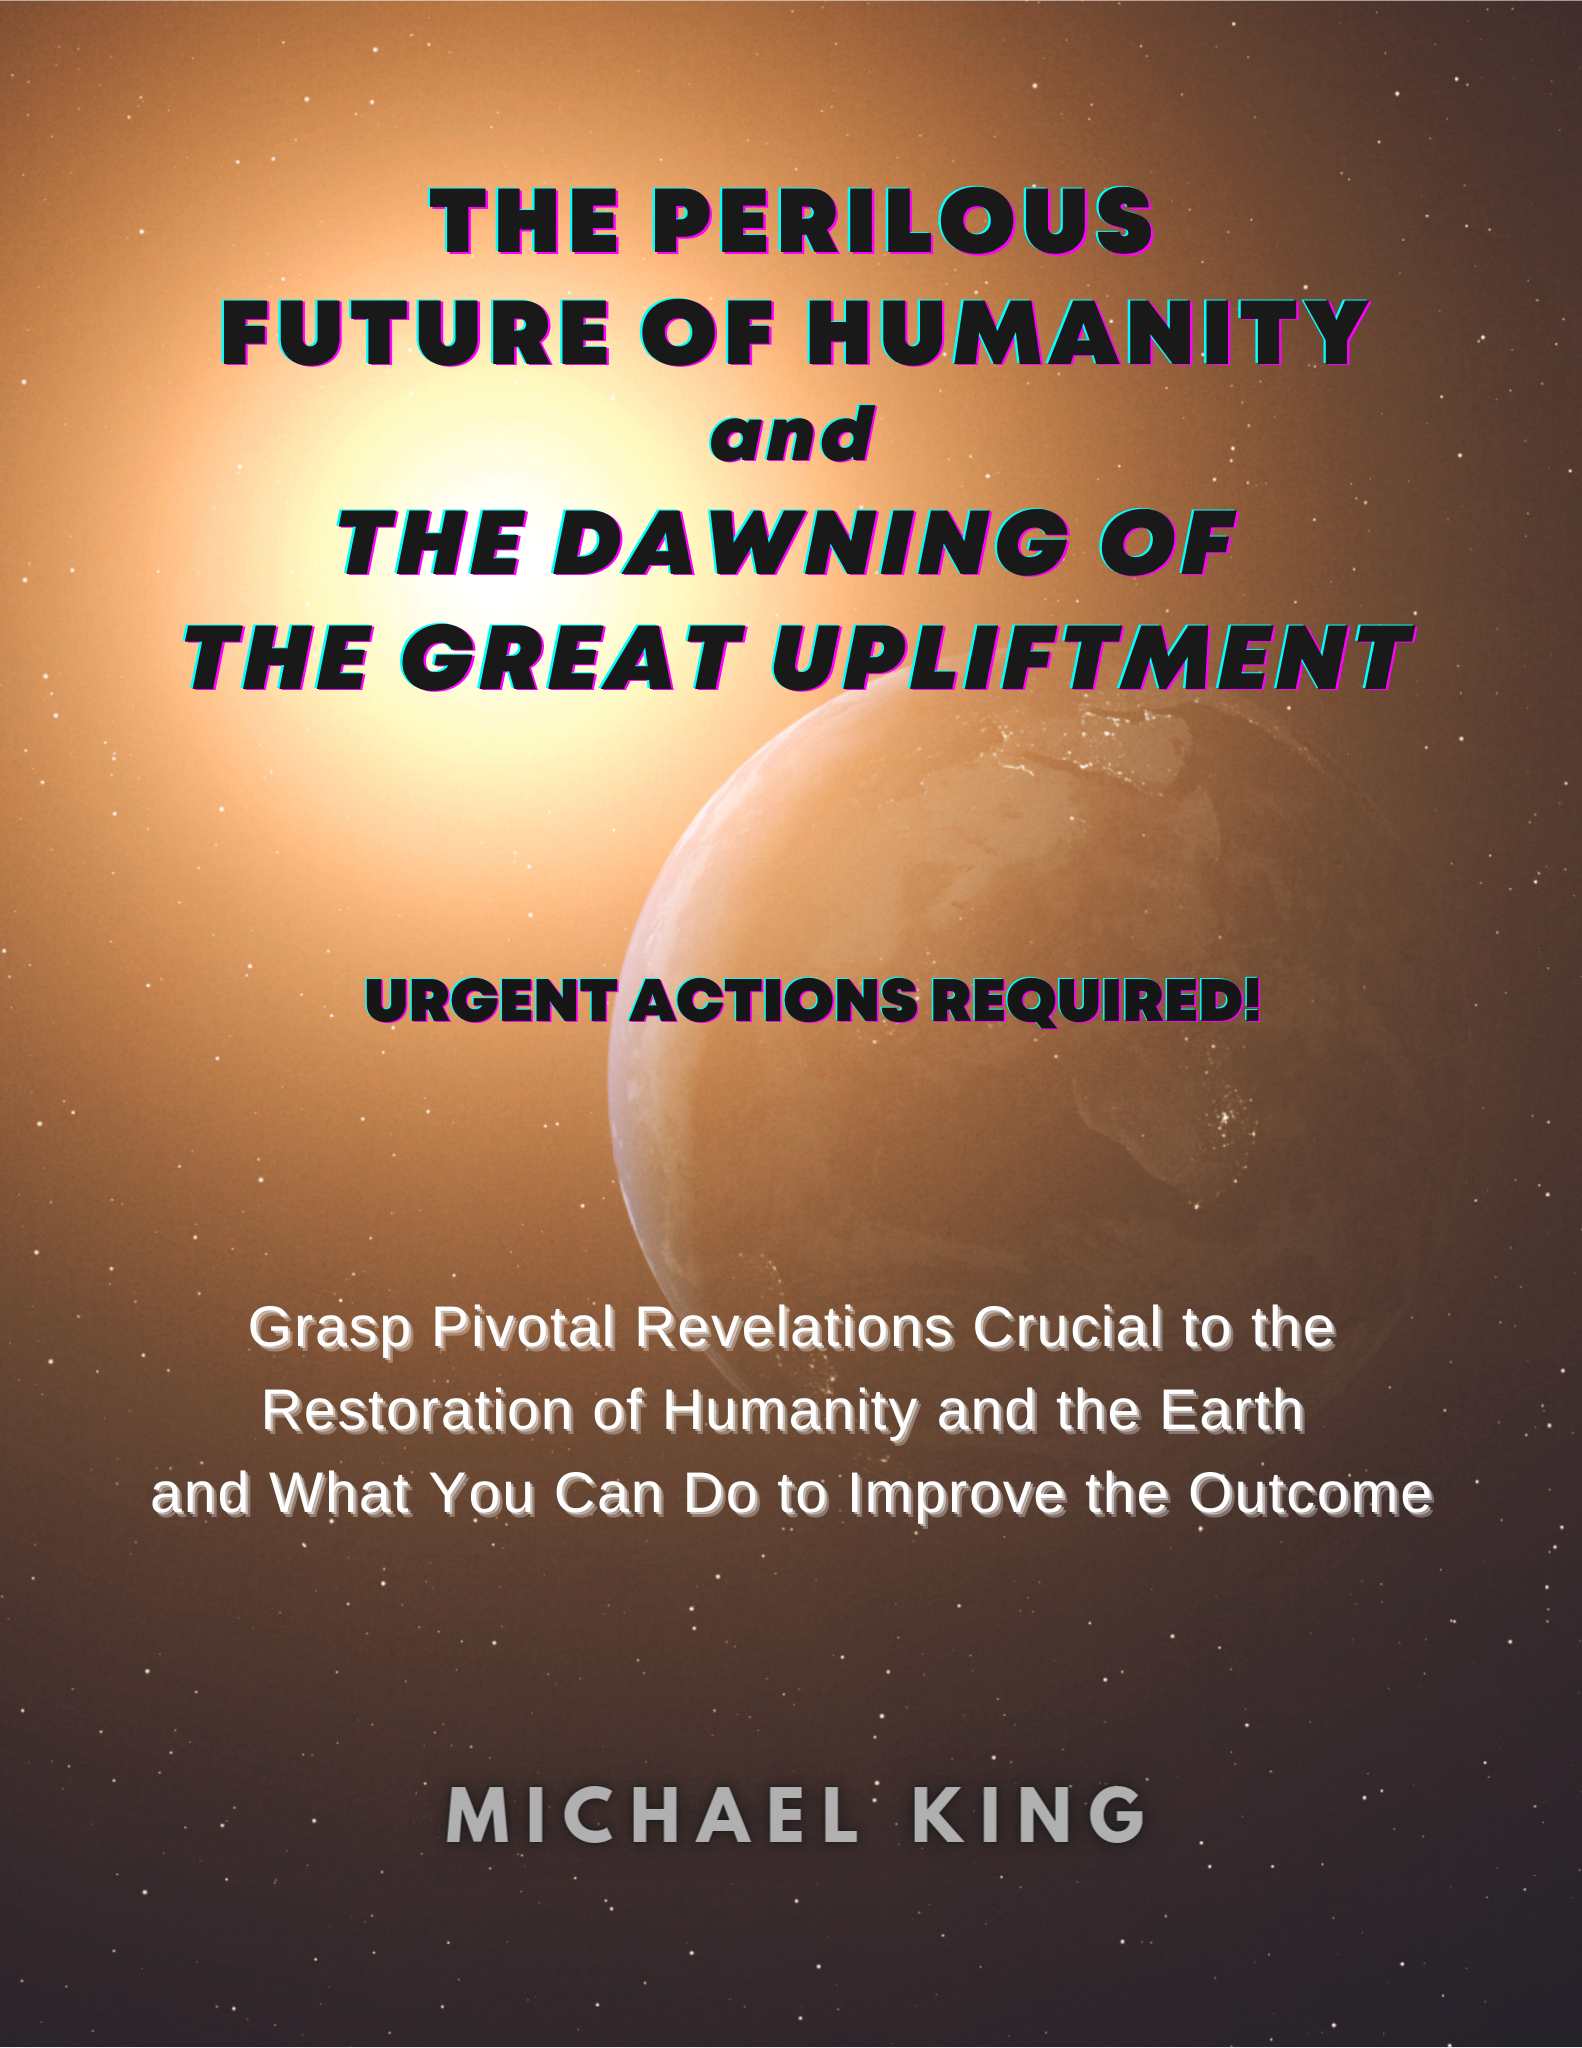 The Perilous Future of Humanity and the Dawning of the Great Upliftment eBook by Michael King